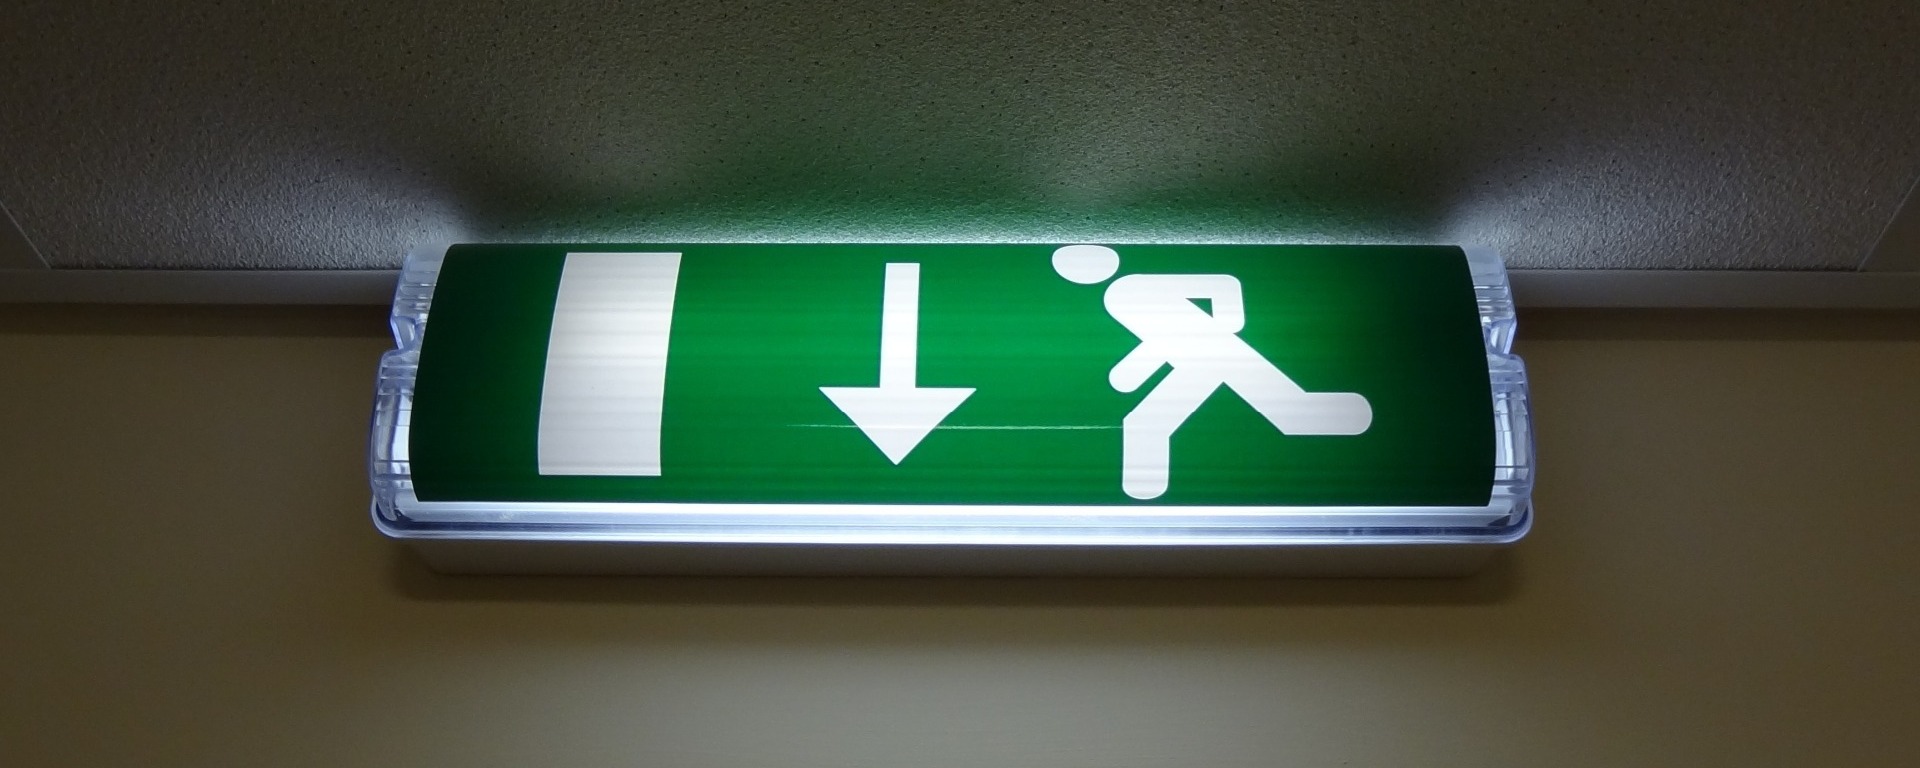 Emergency lighting is a requirement for workplaces, public building and high rise residential properties